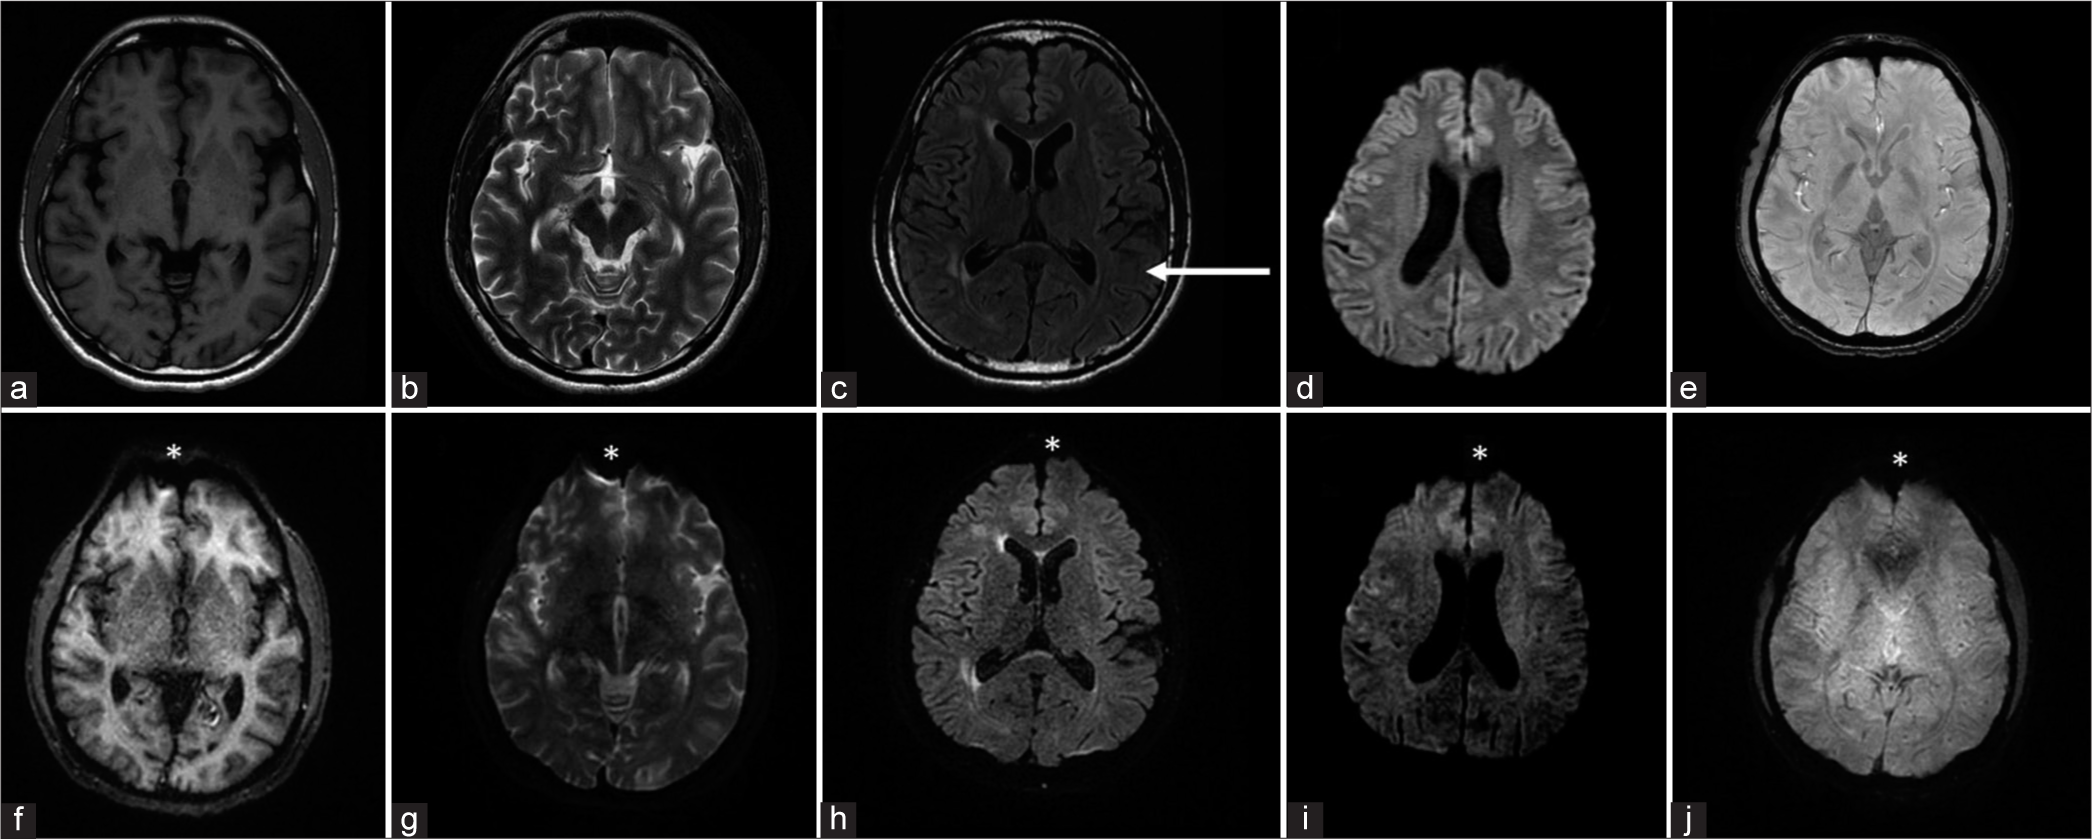 Multi-contrast echo-planar imaging sequence (Echo-planar imaging mix) in clinical situations demanding faster MRI-brain scans